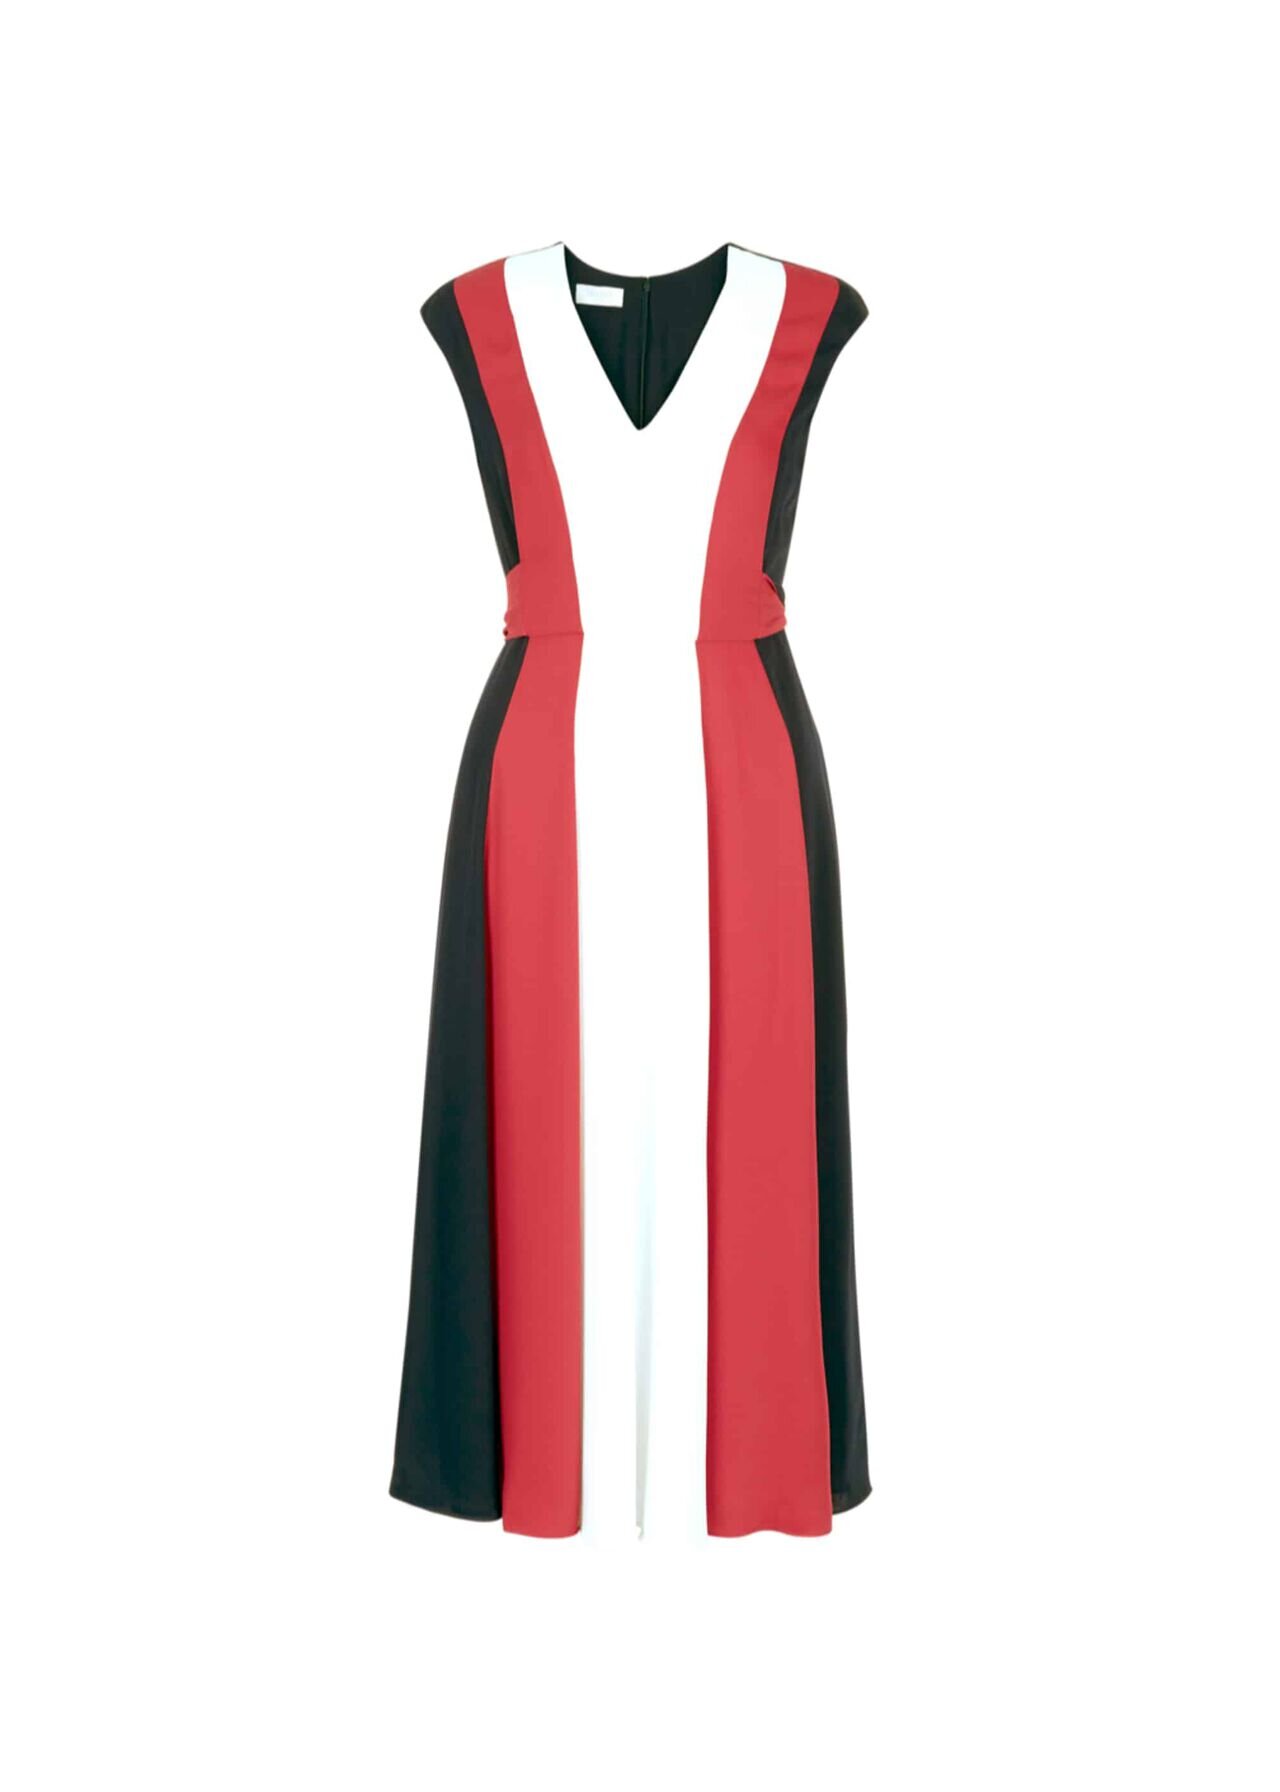 Hobbs Bailly Dress in Navy/Ivory/Pink — UFO No More